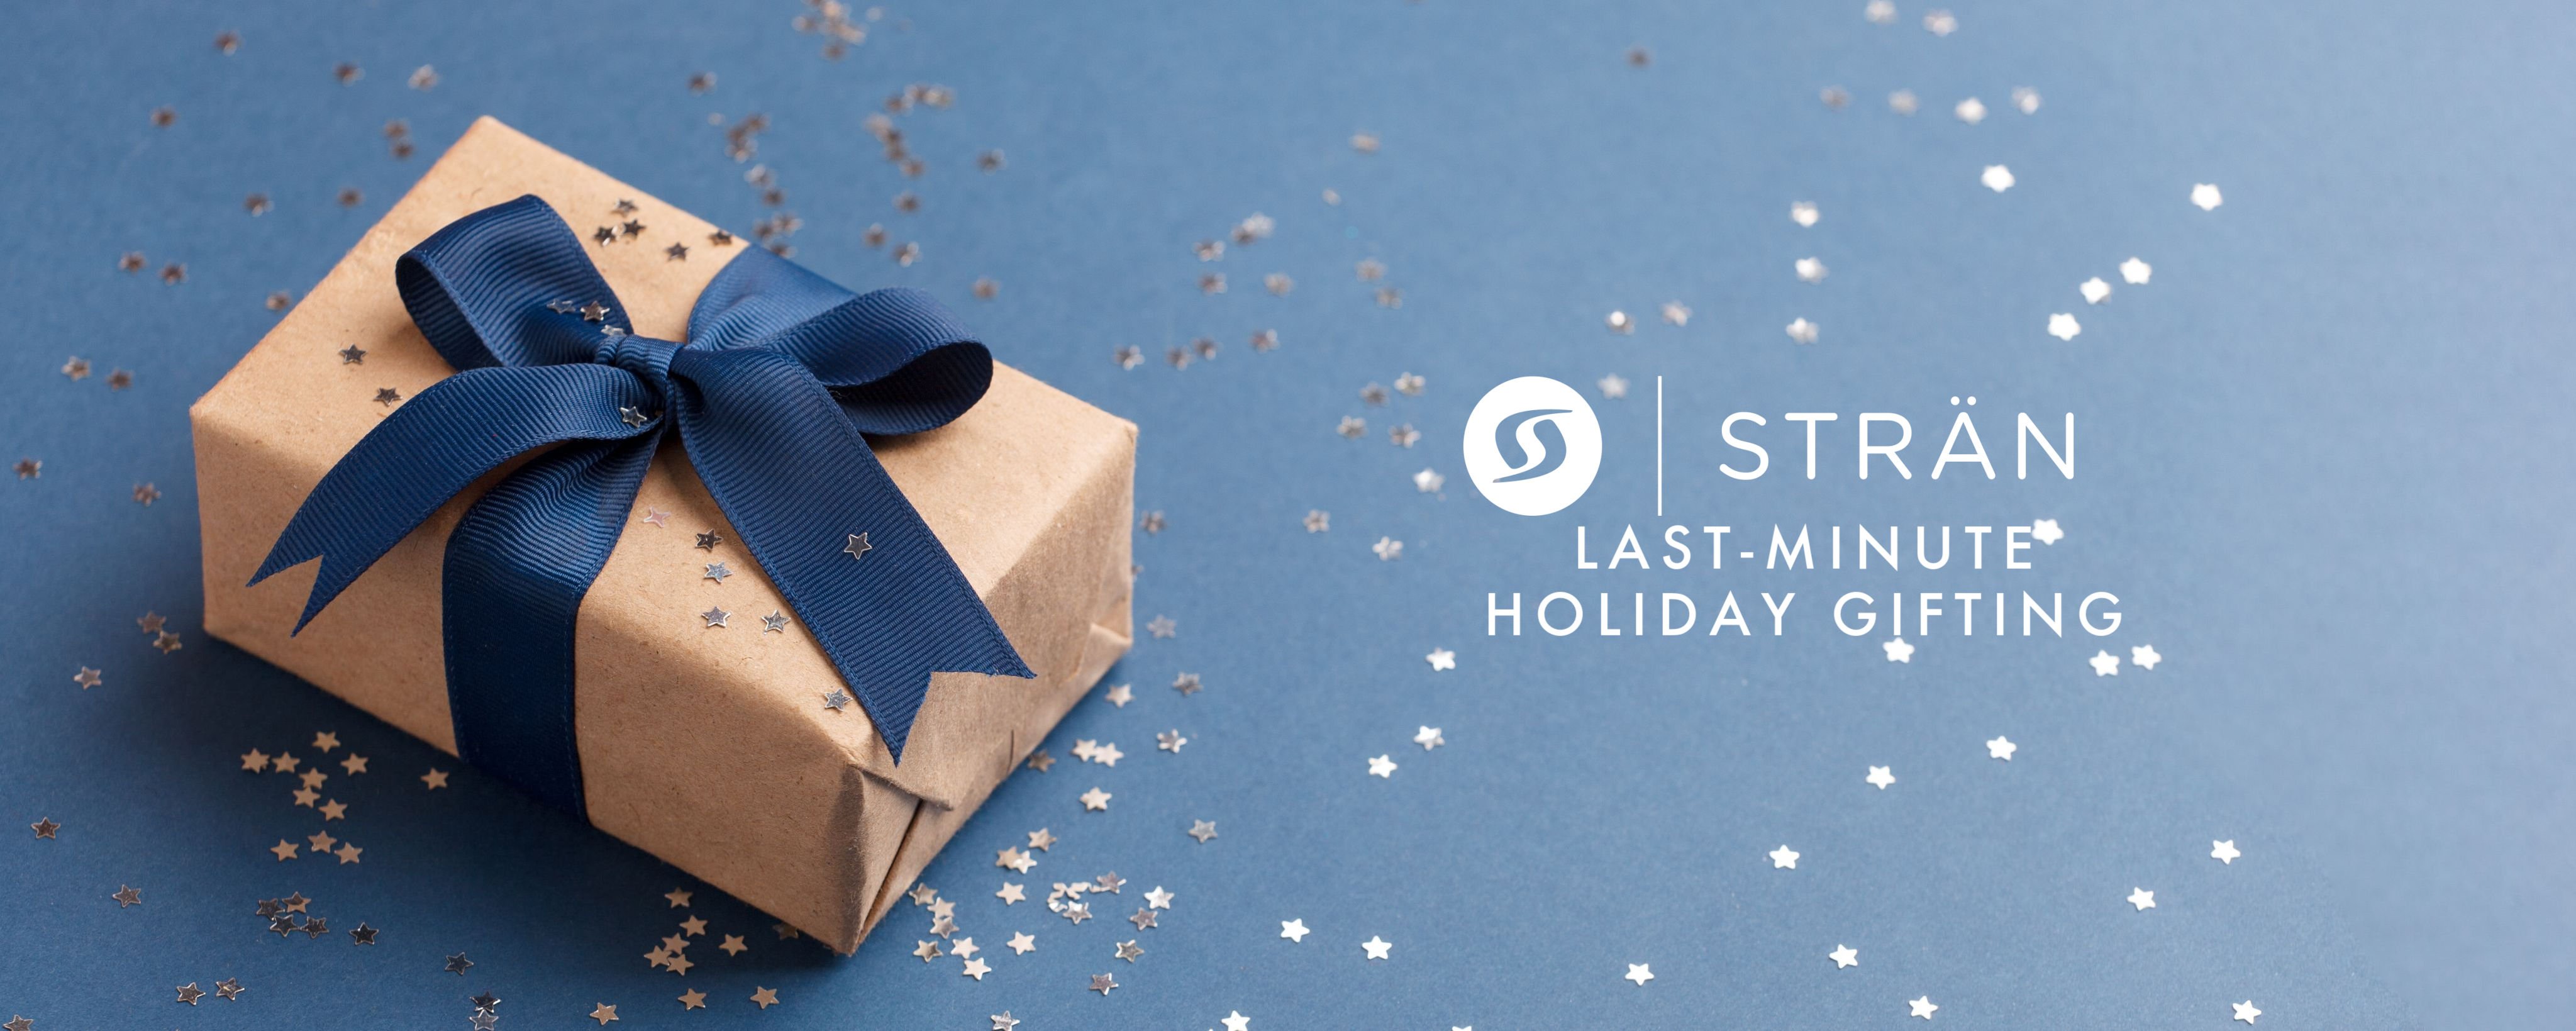 Last-Minute Holiday Gifting With Stran